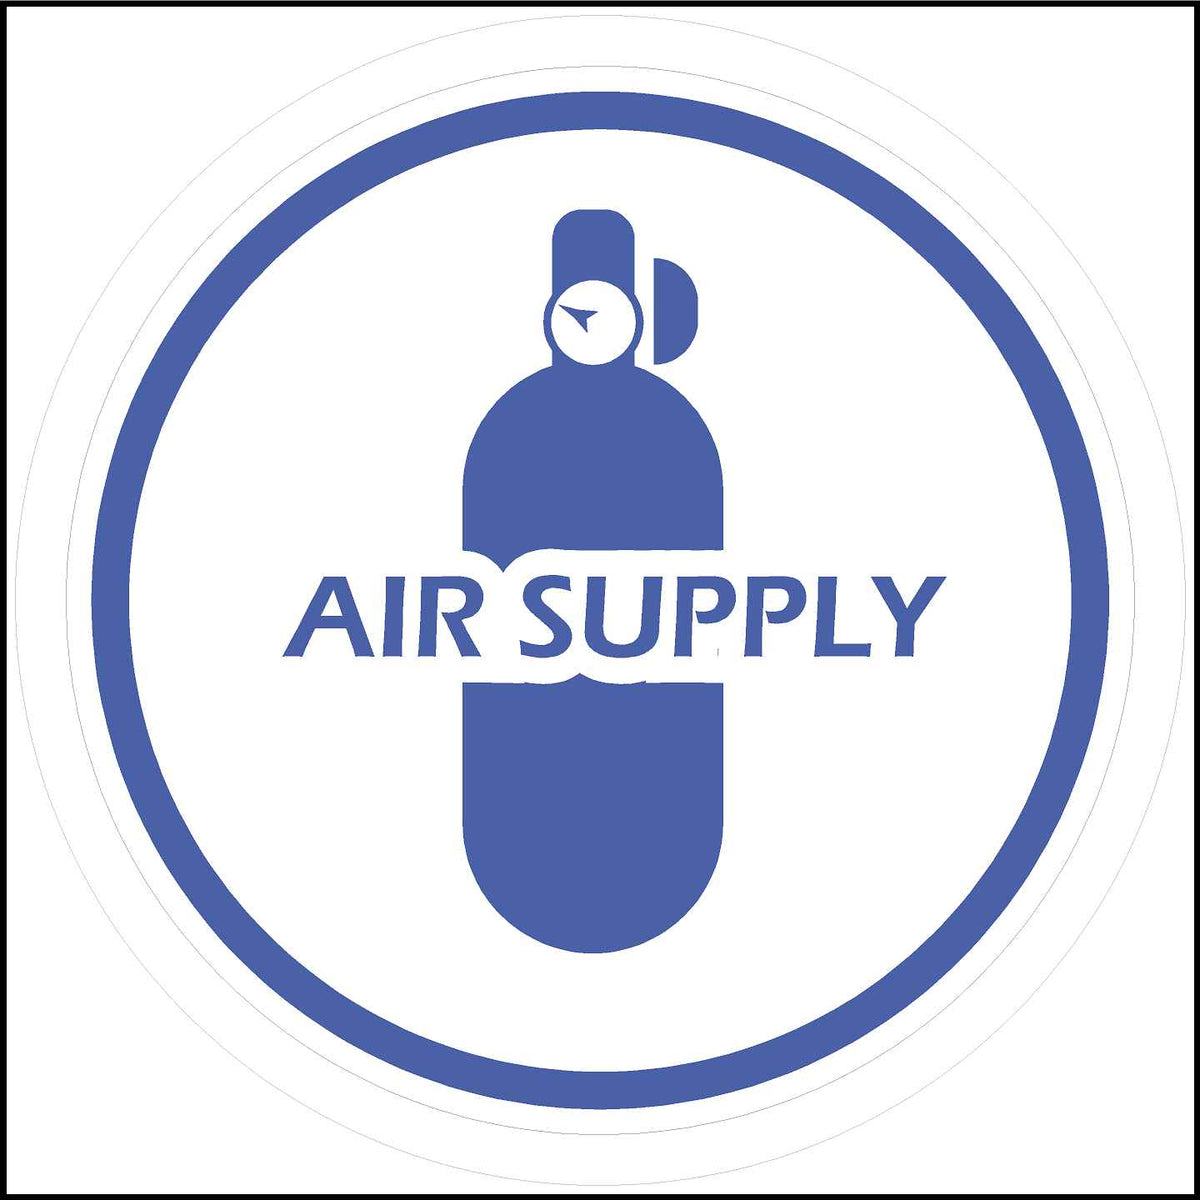 Air Supply sticker printed in blue and white.